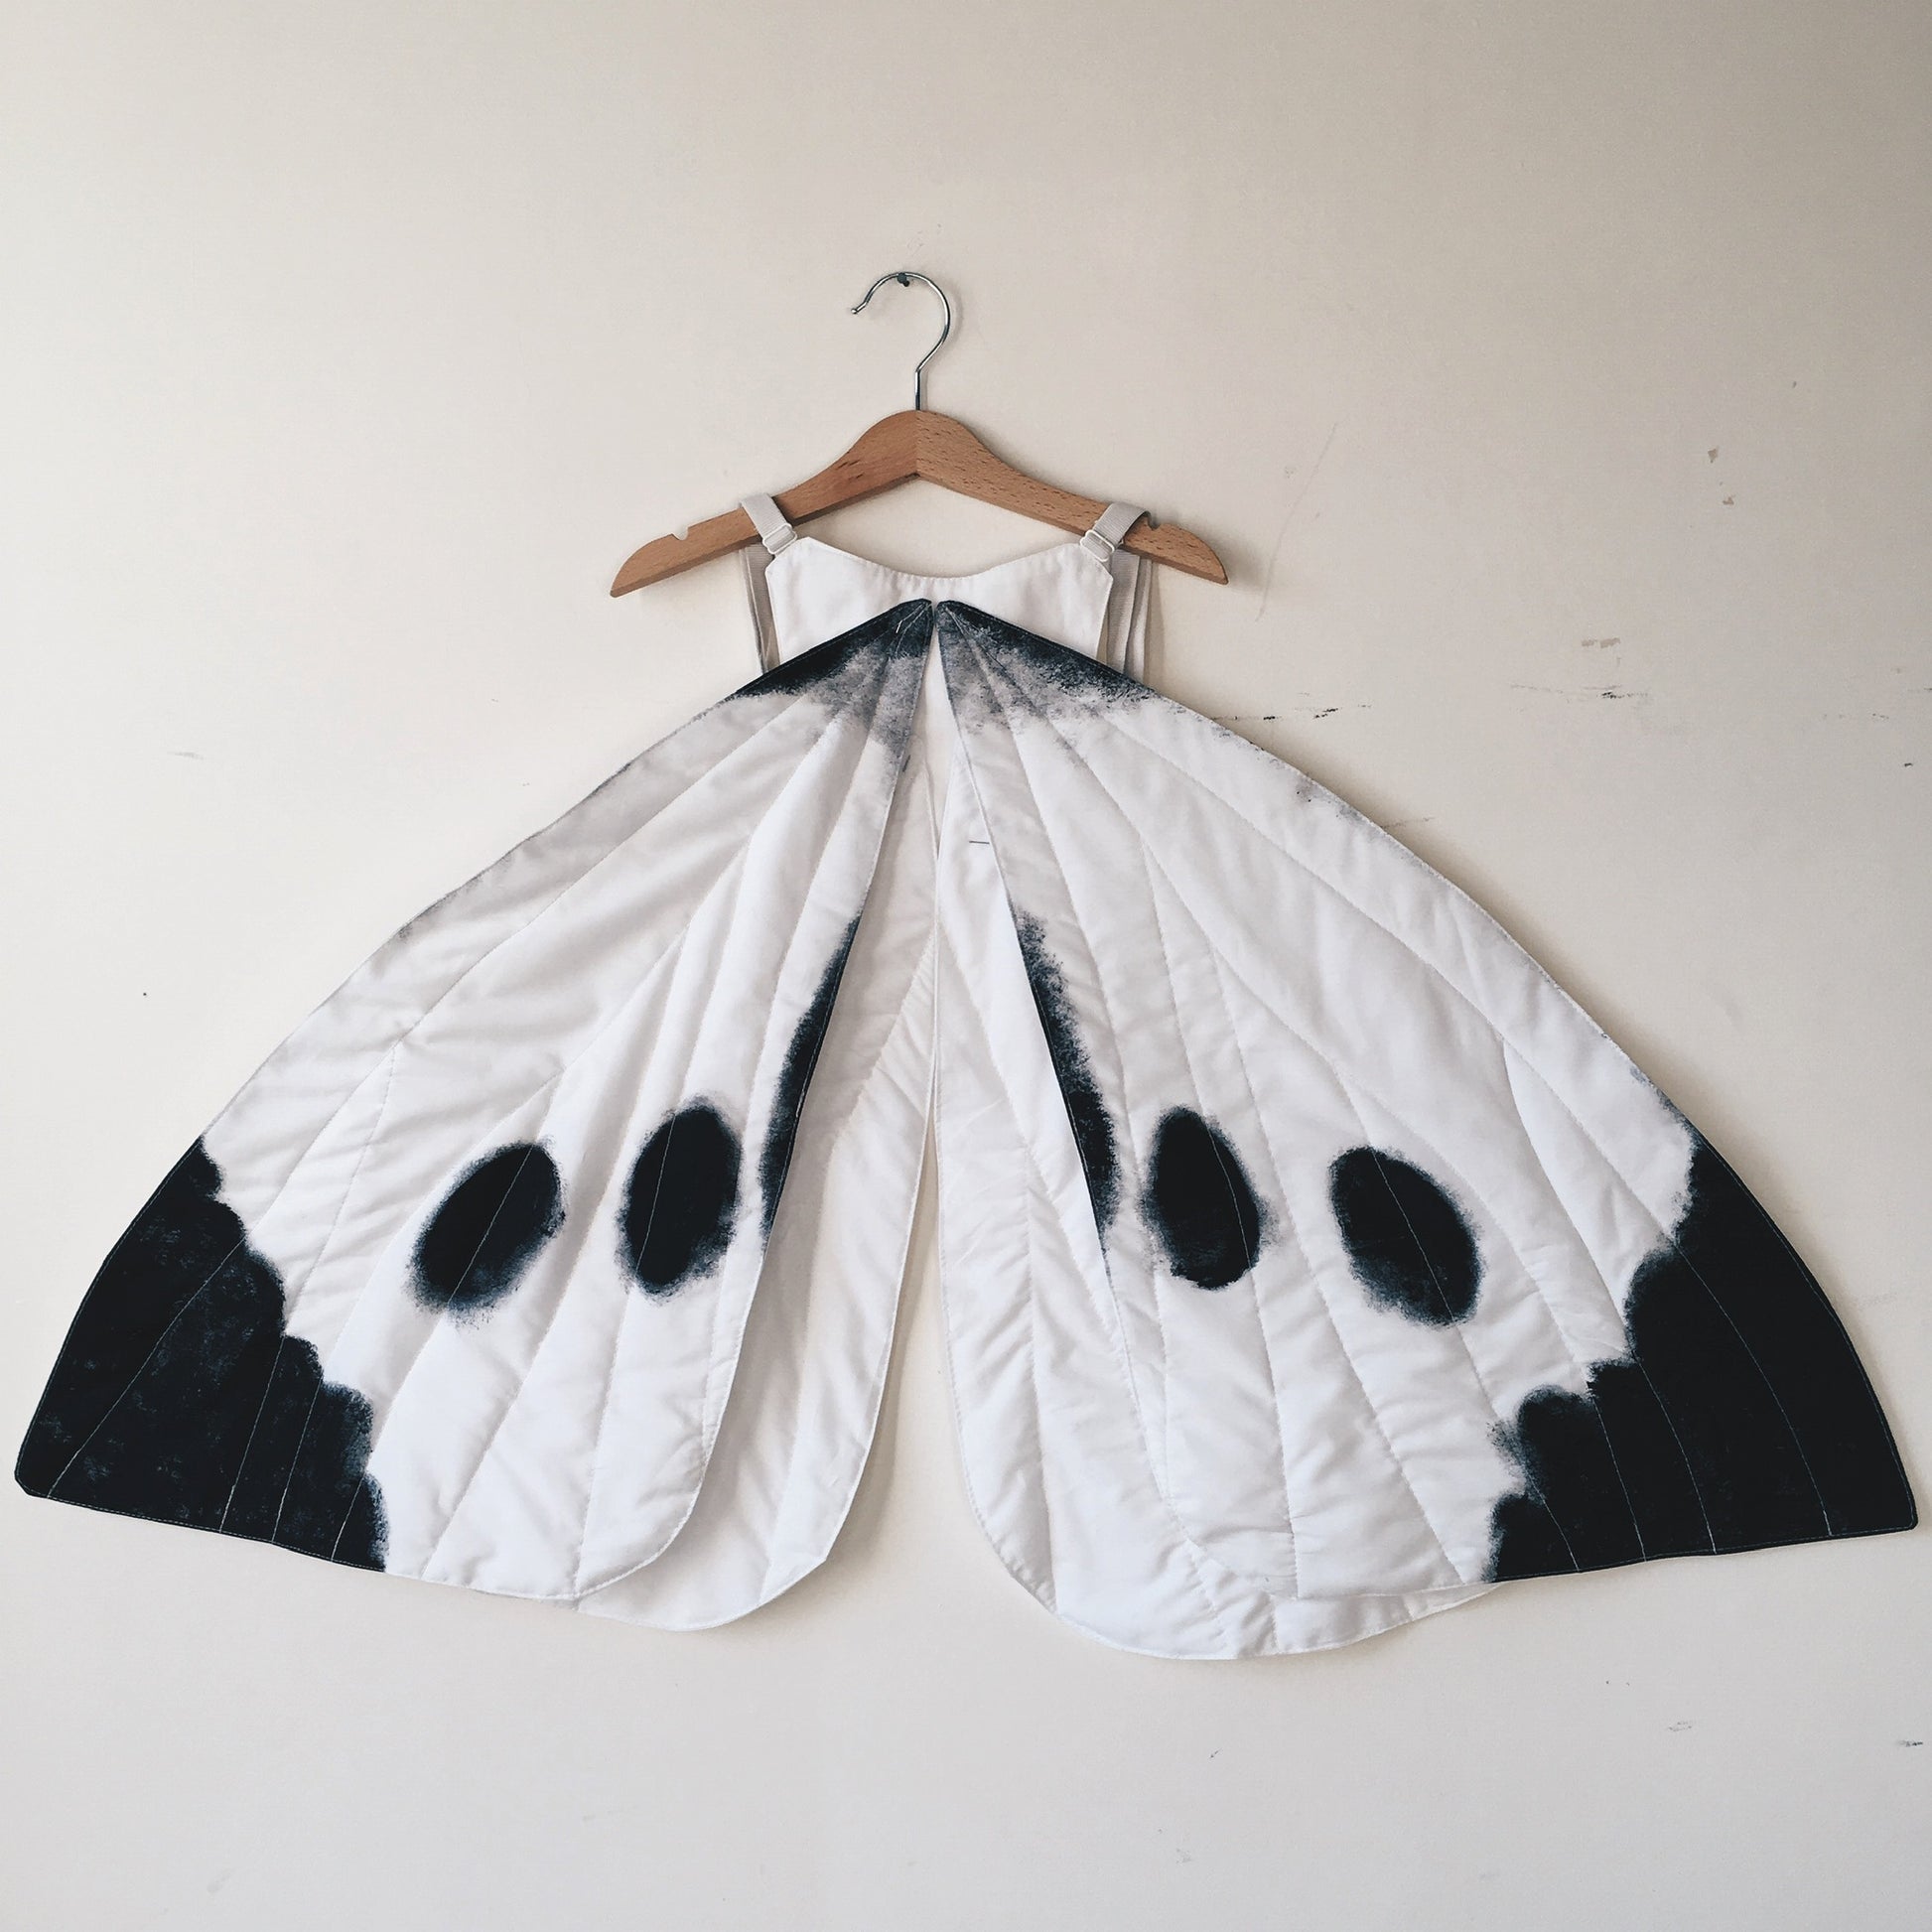 Cabbage white butterfly wings on a wooden hanger against a white wall